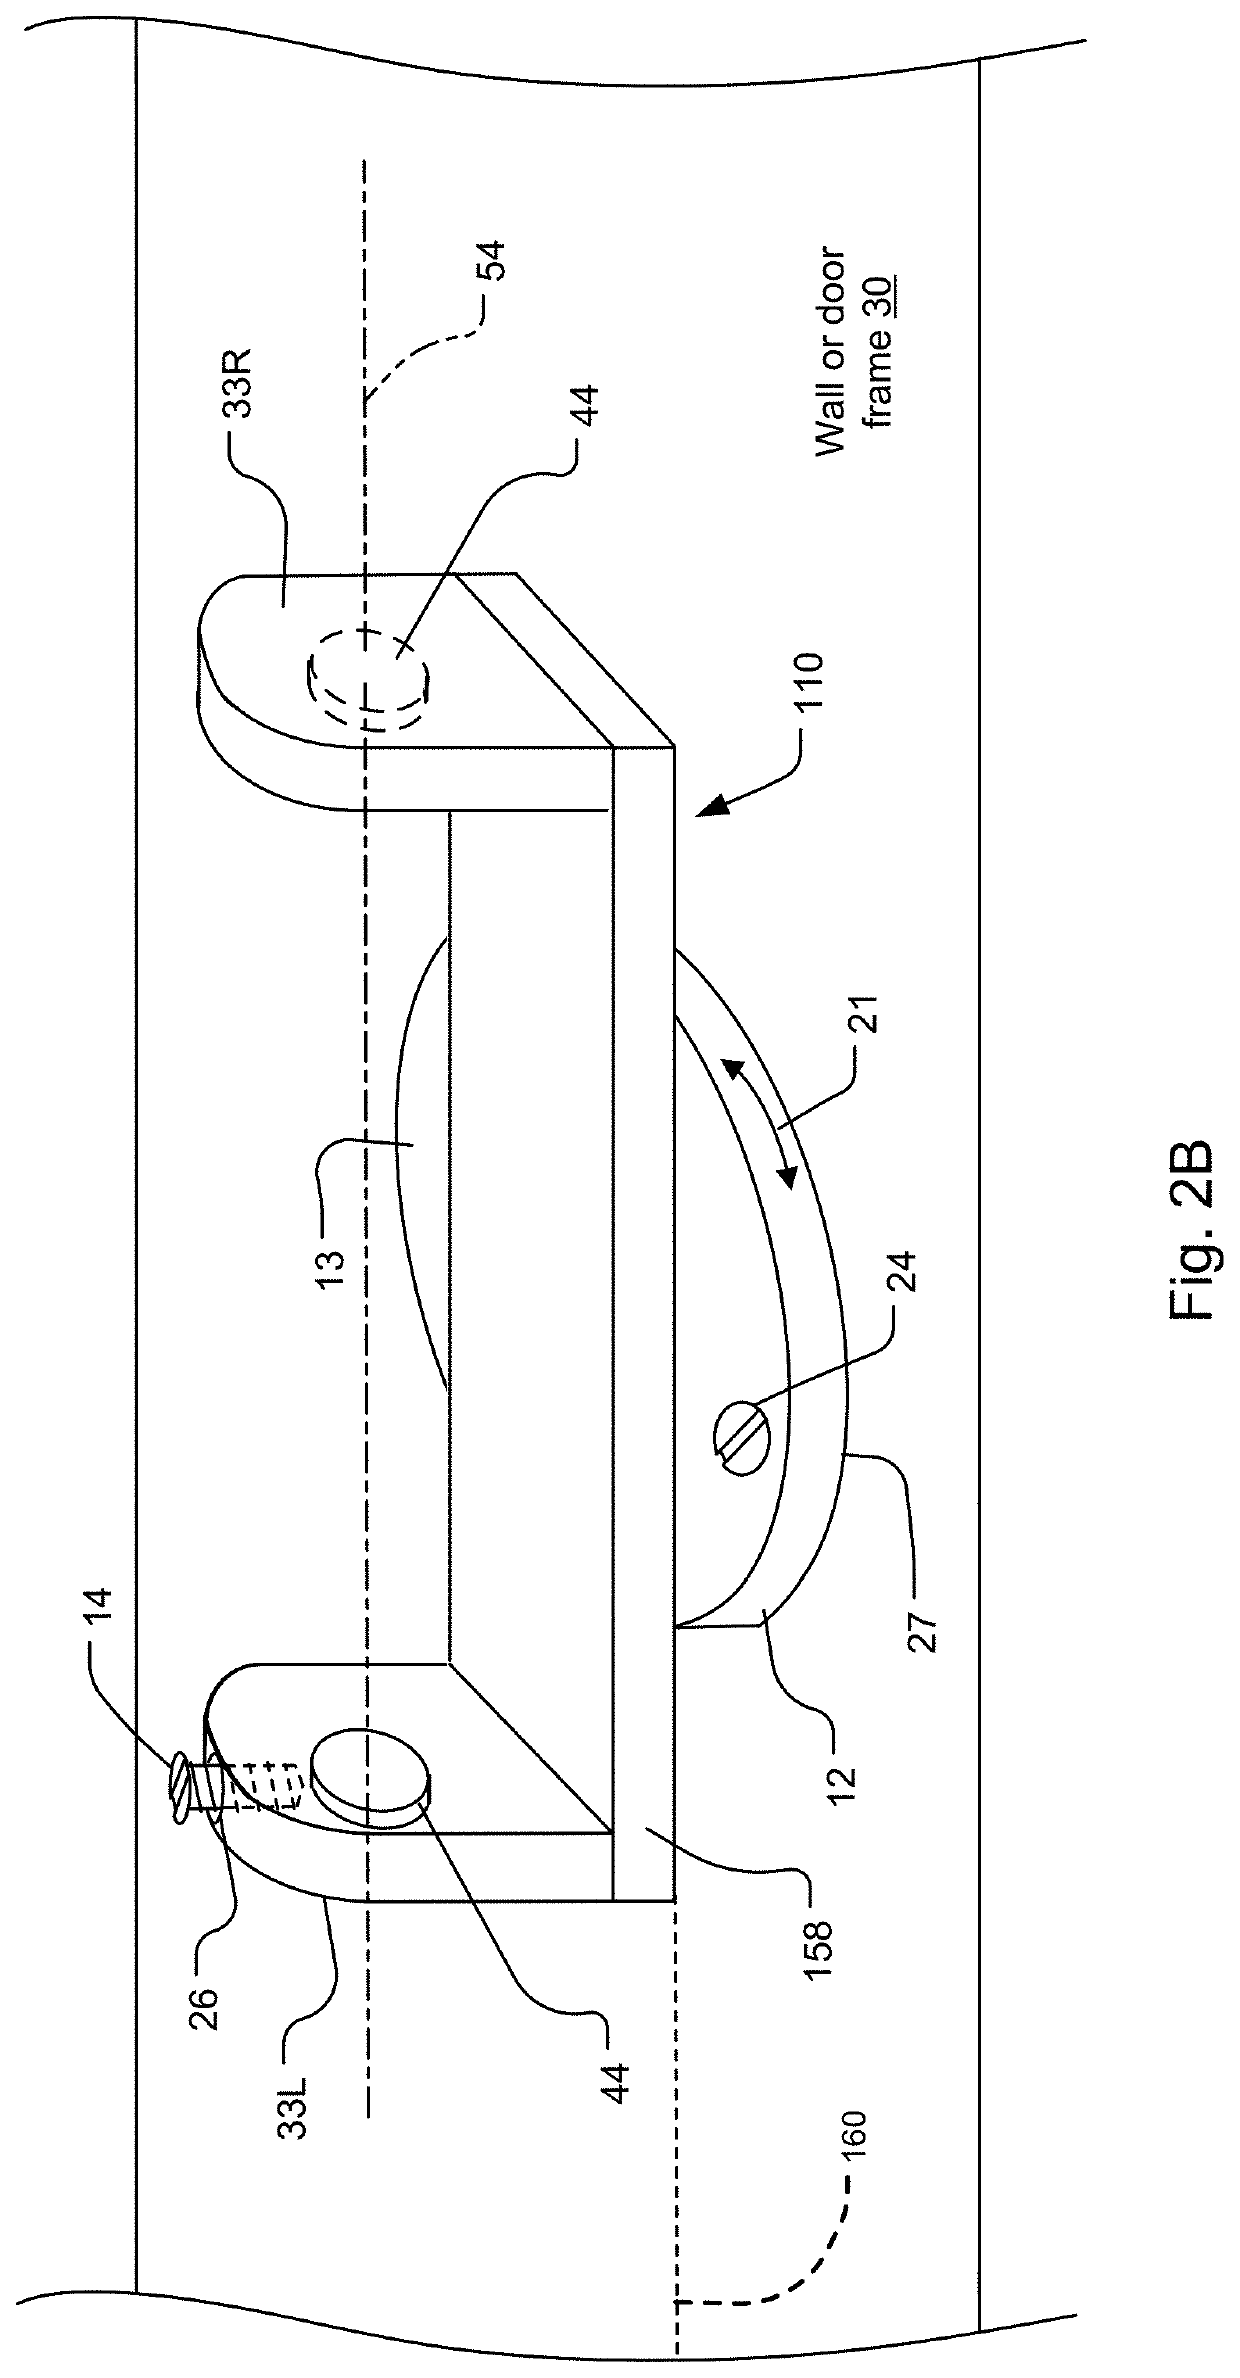 Optical displacement detector with adjustable pattern direction